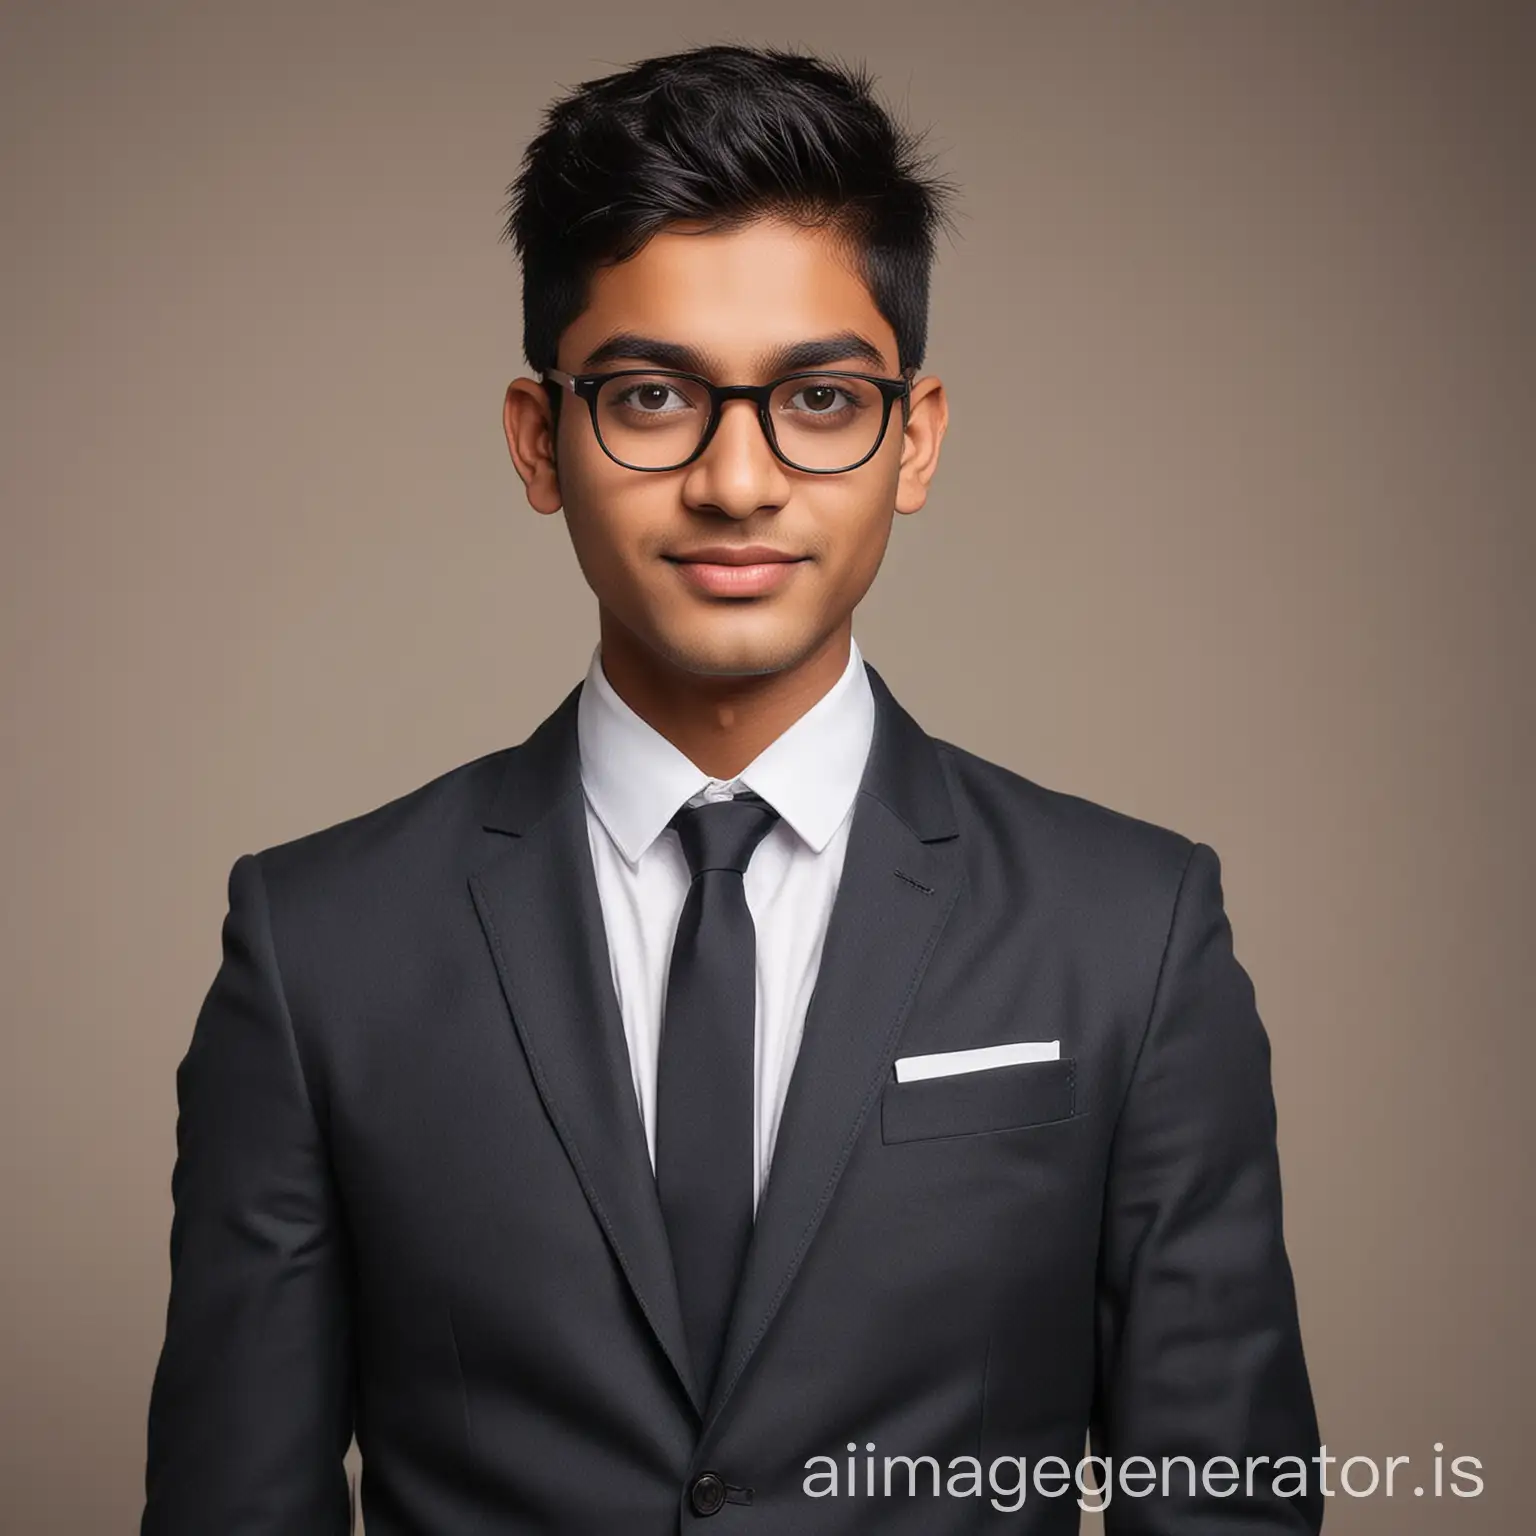 Young-Indian-Man-in-Formal-Attire-with-Spectacles-for-LinkedIn-Portrait